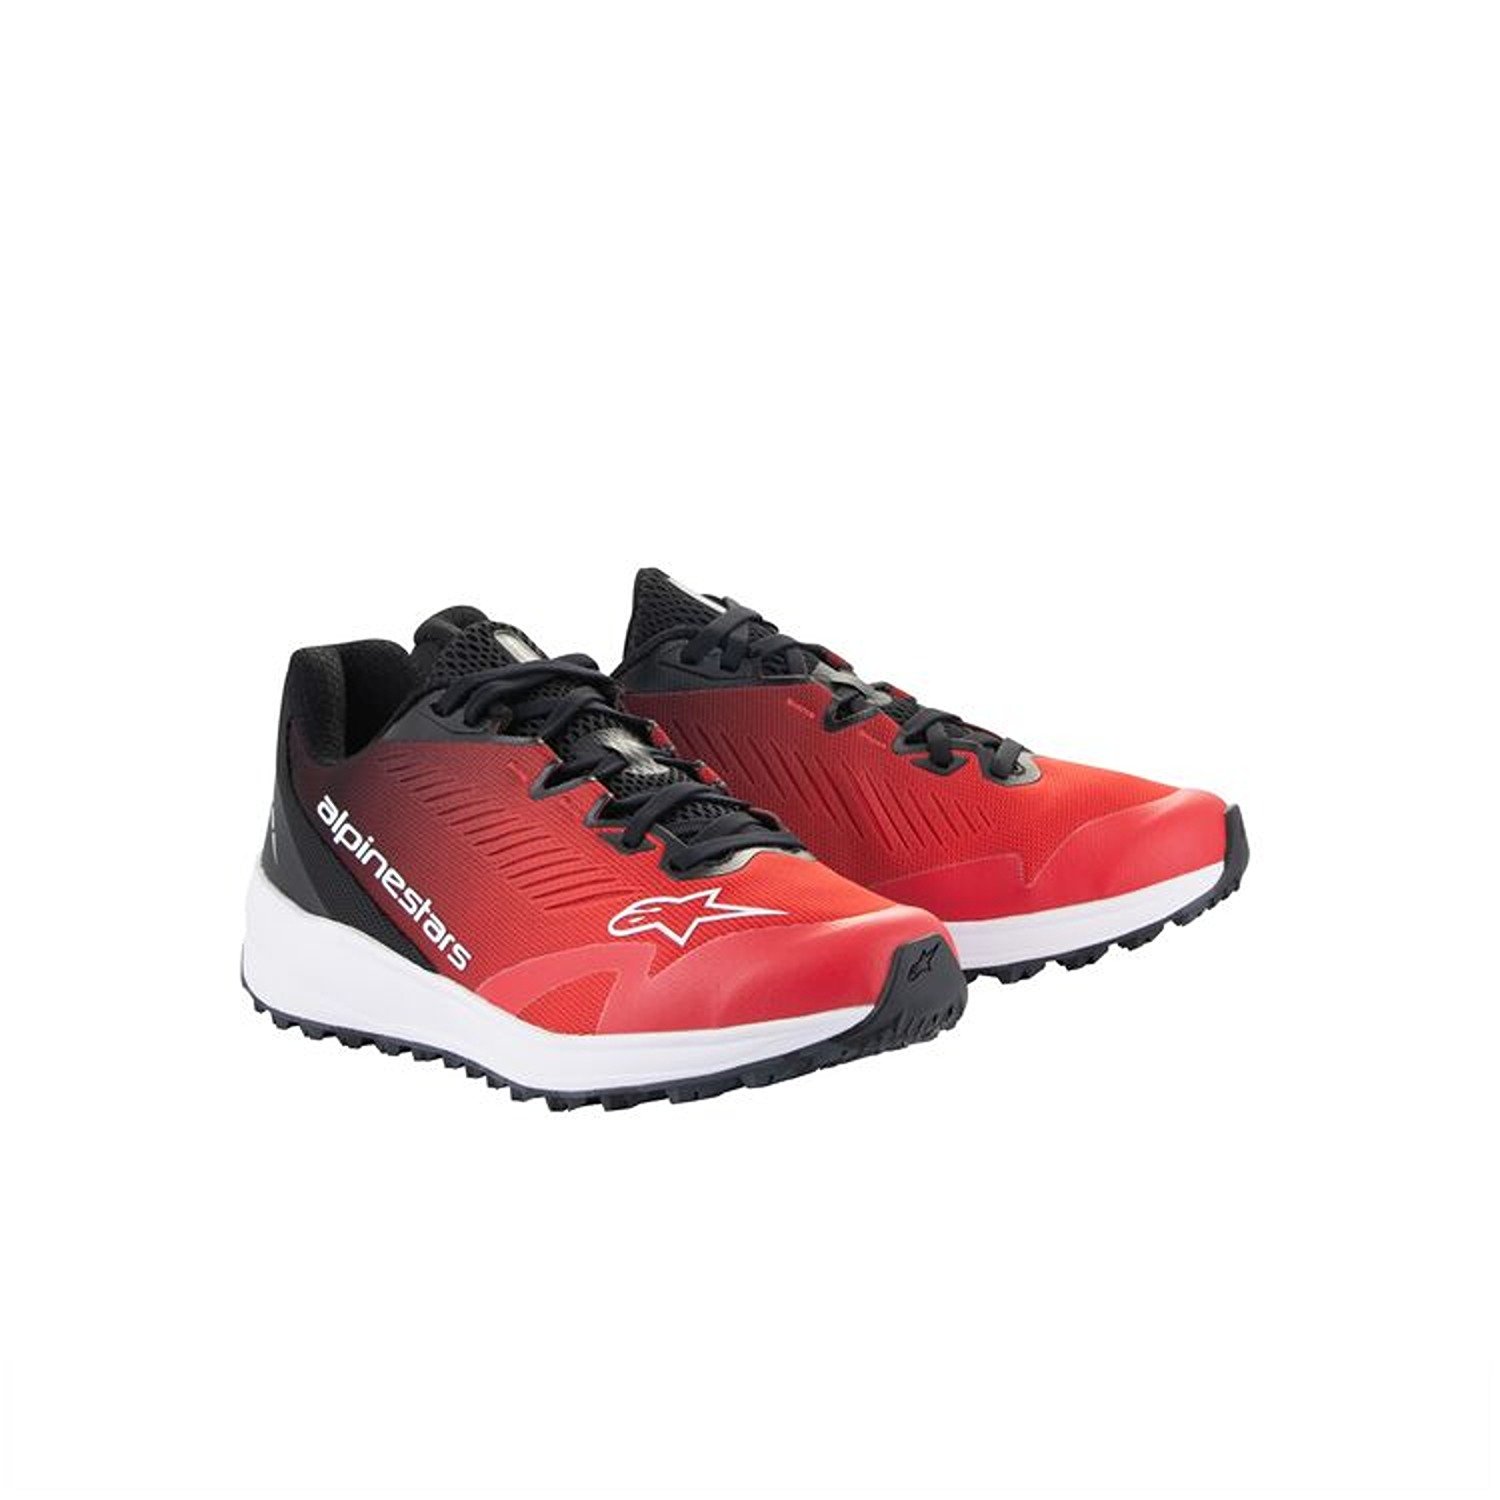 Image of Alpinestars Meta Road V2 Shoes Red Black White Taille US 13